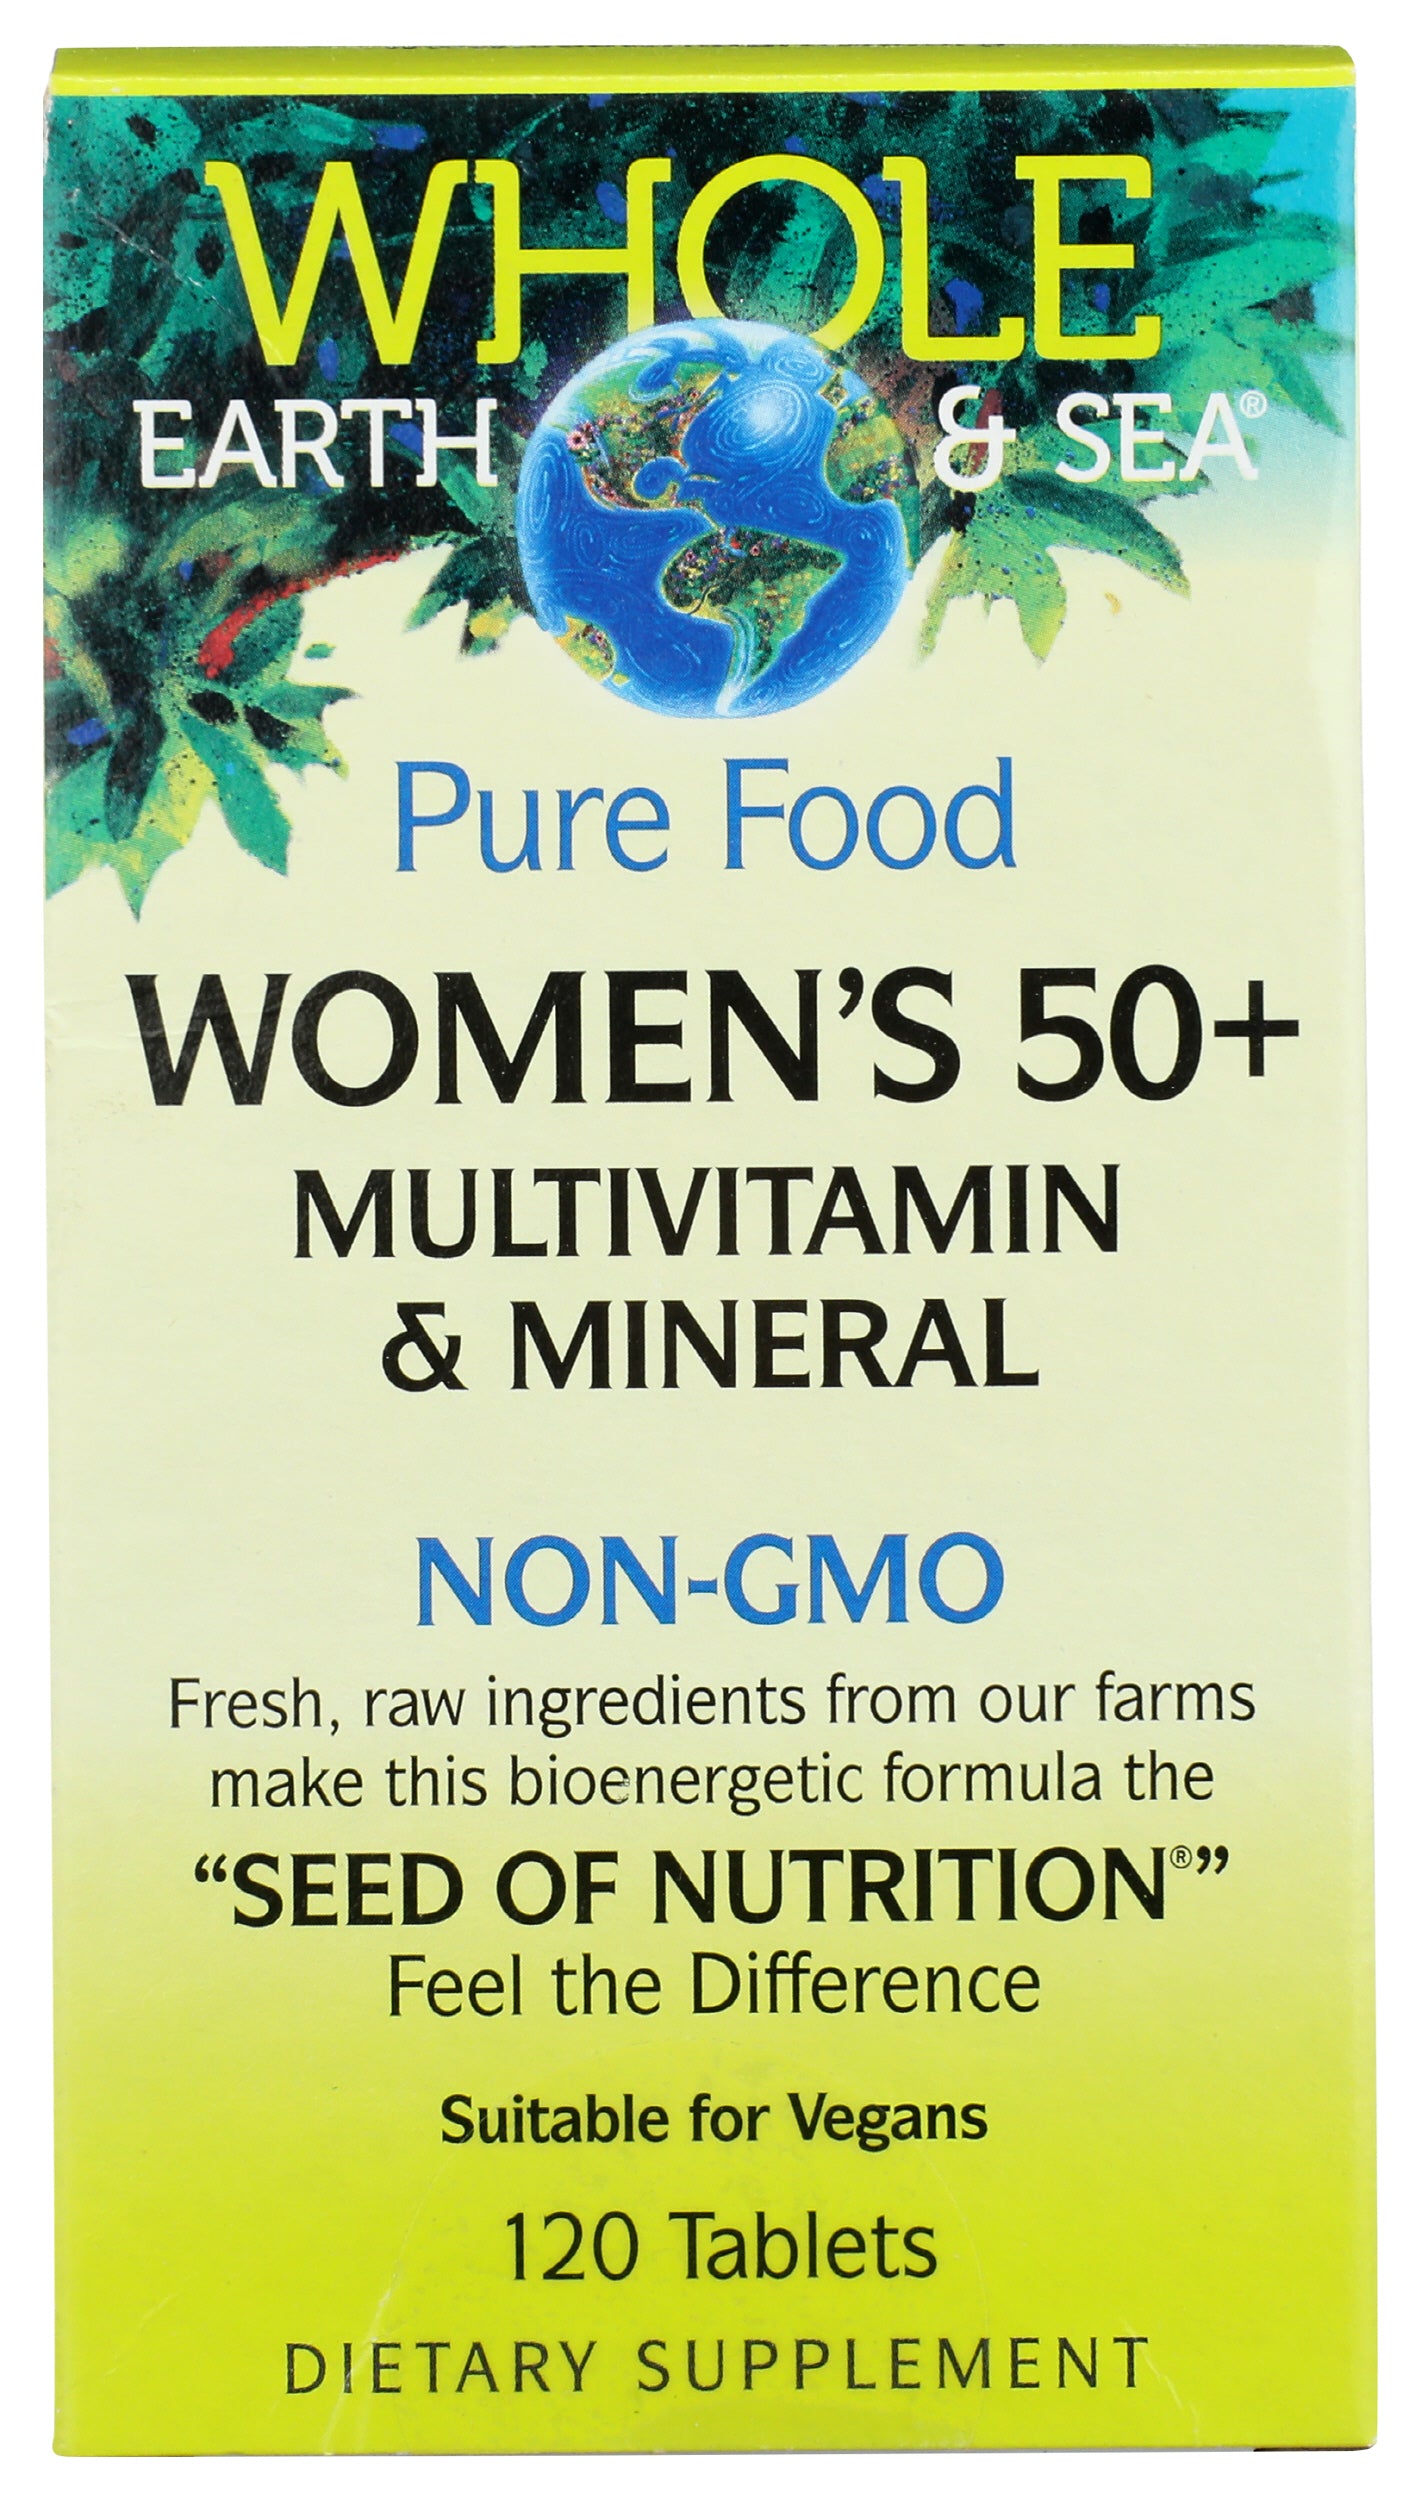 Whole Earth & Sea Women's 50+ Multivitamin 120 Tablets Front of Box